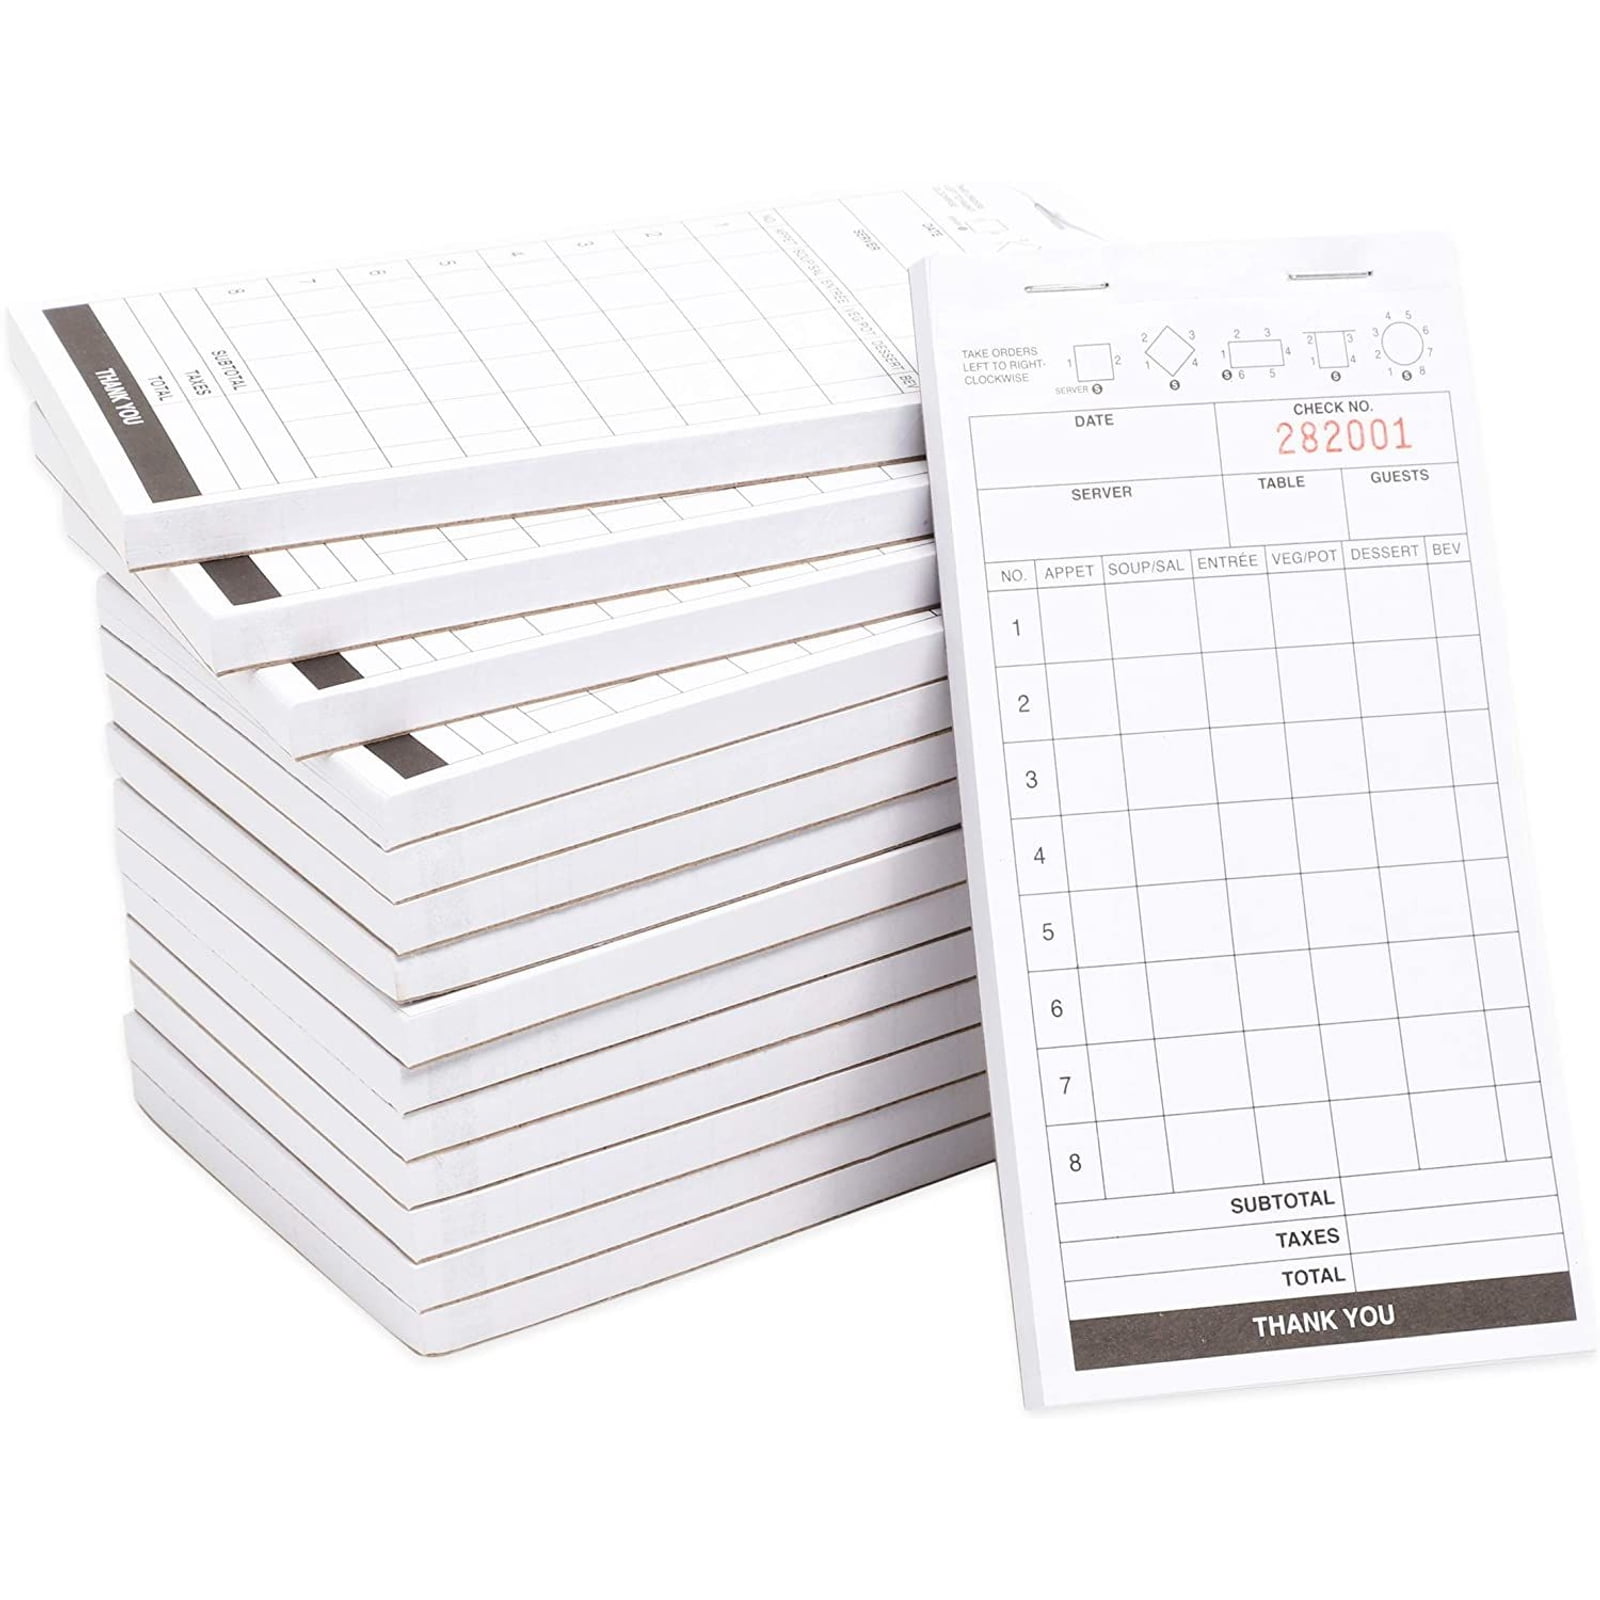 RESTAURANT CAFE WAITER FOOD ORDER TABLE COVERS PADS X 10 PADS 3 PART 